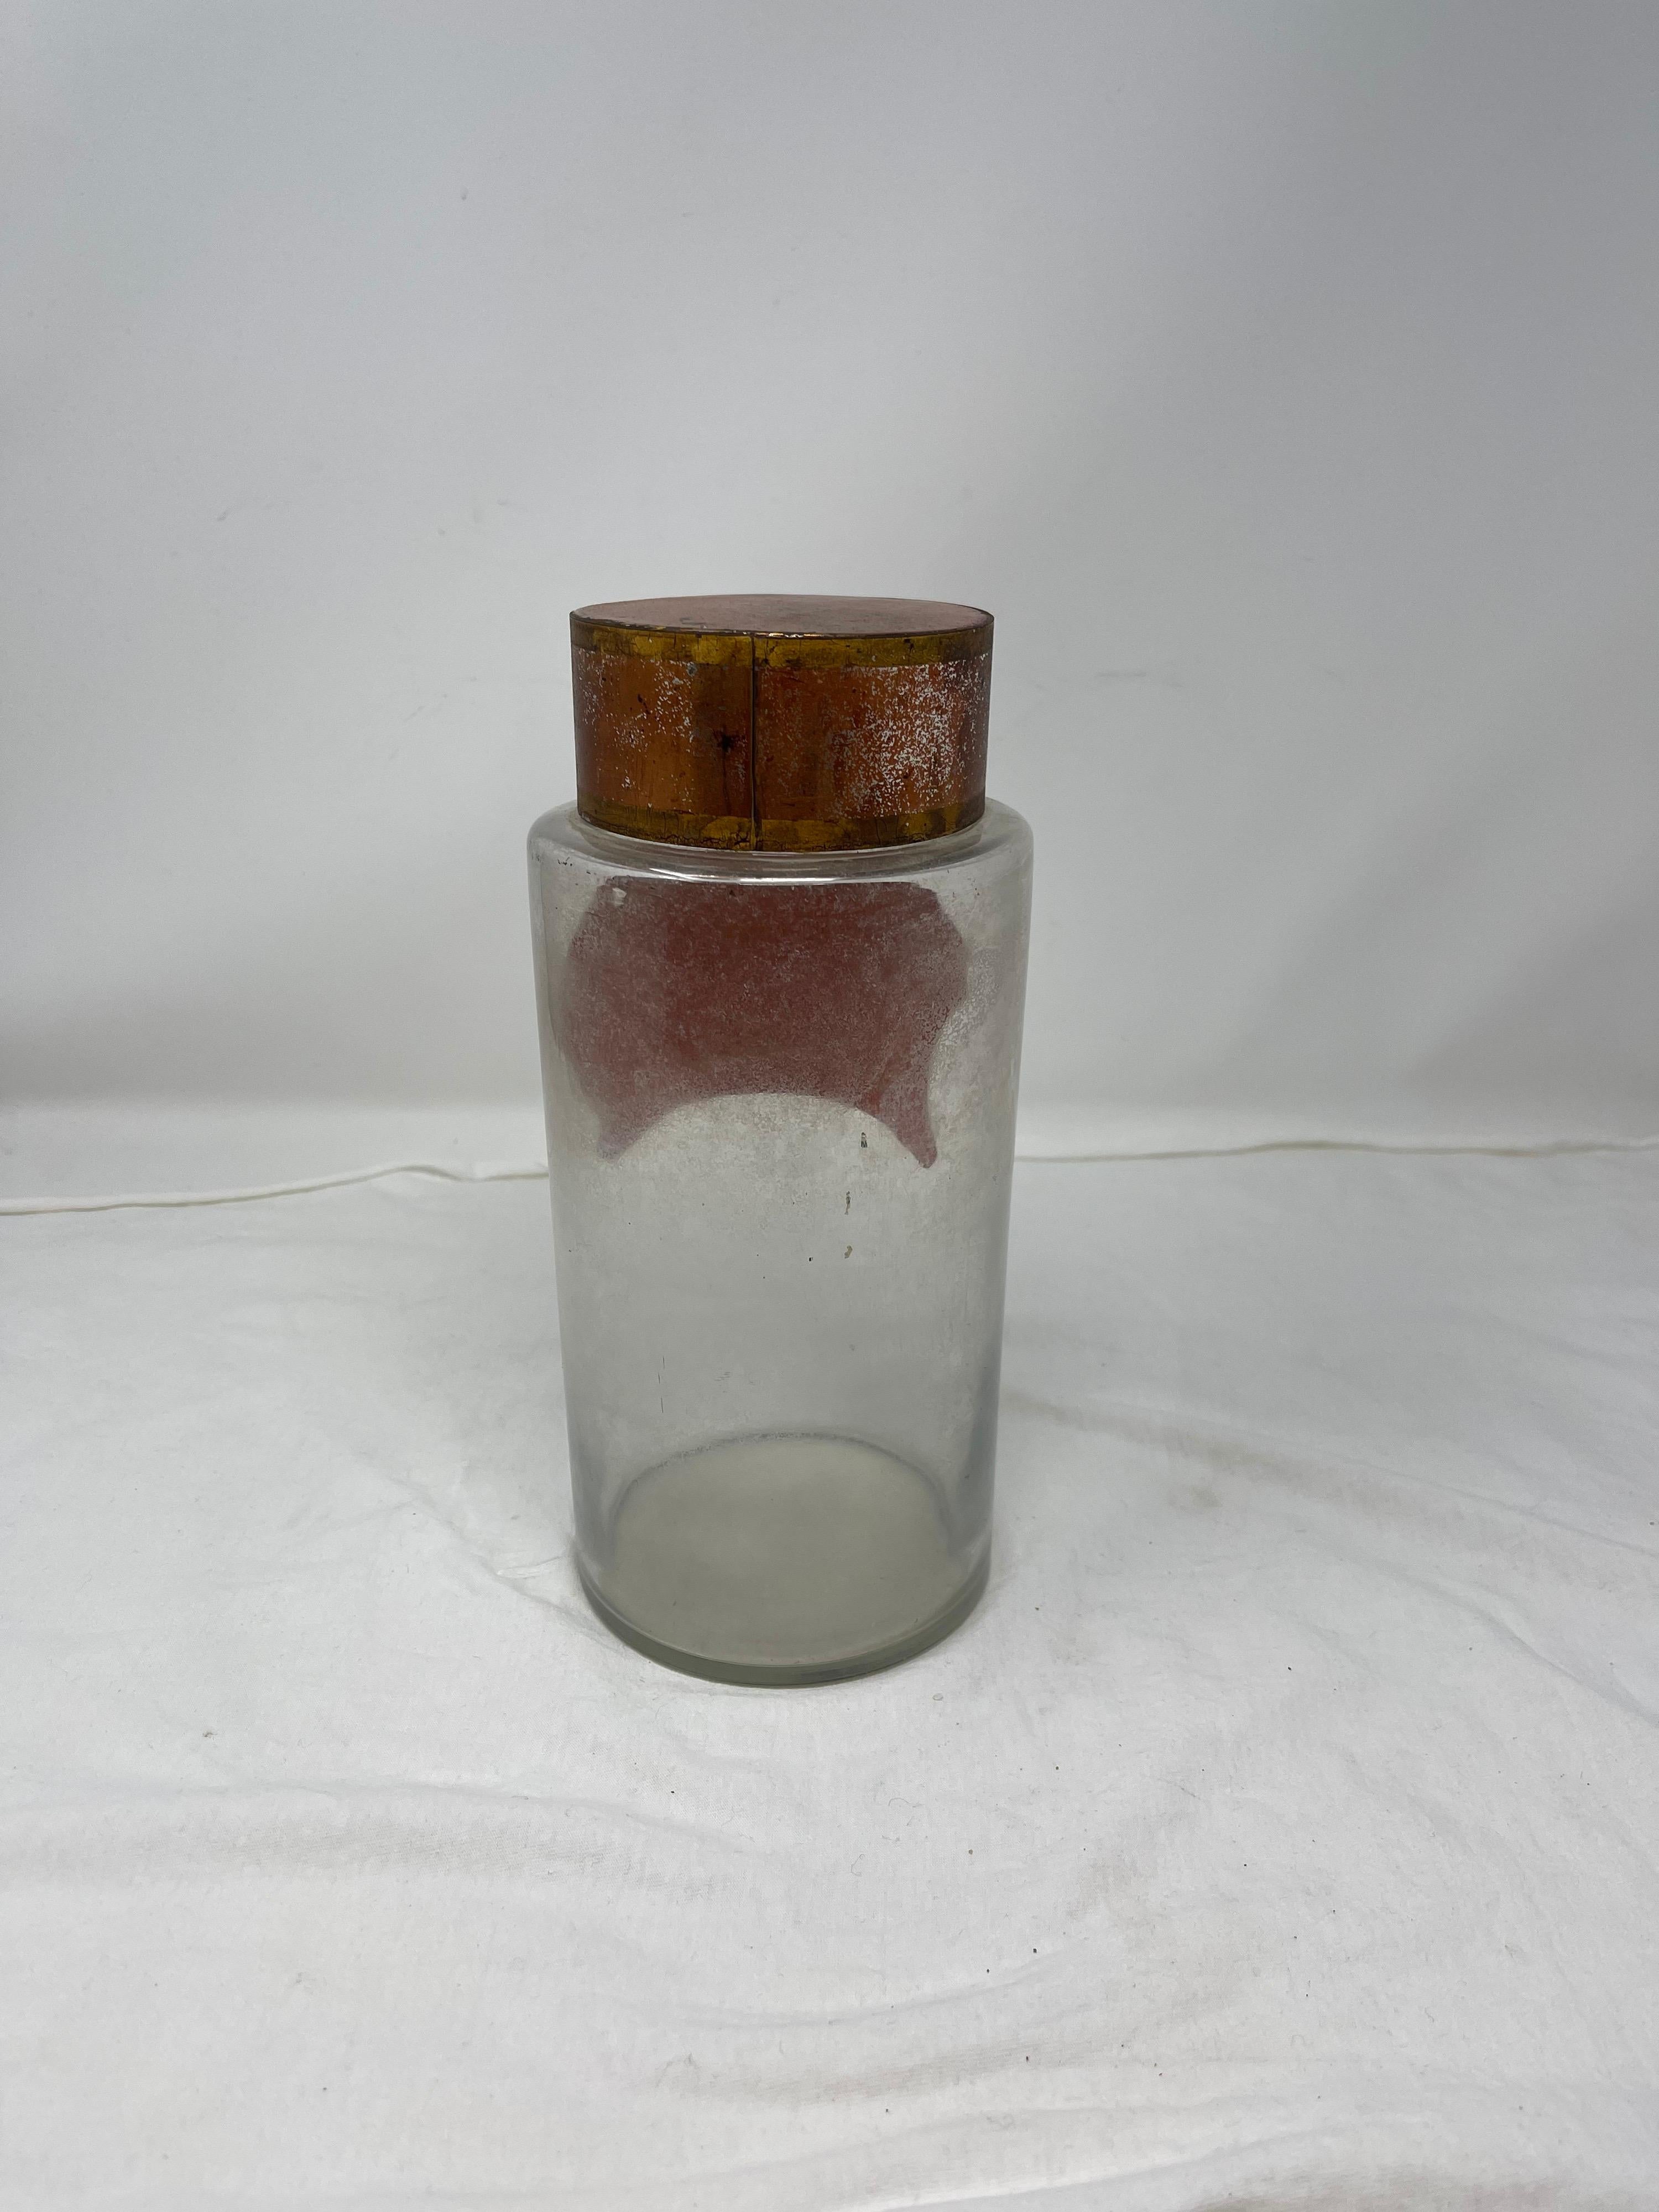 French Antique Pharmacy Jar “Smilax Medica” For Sale